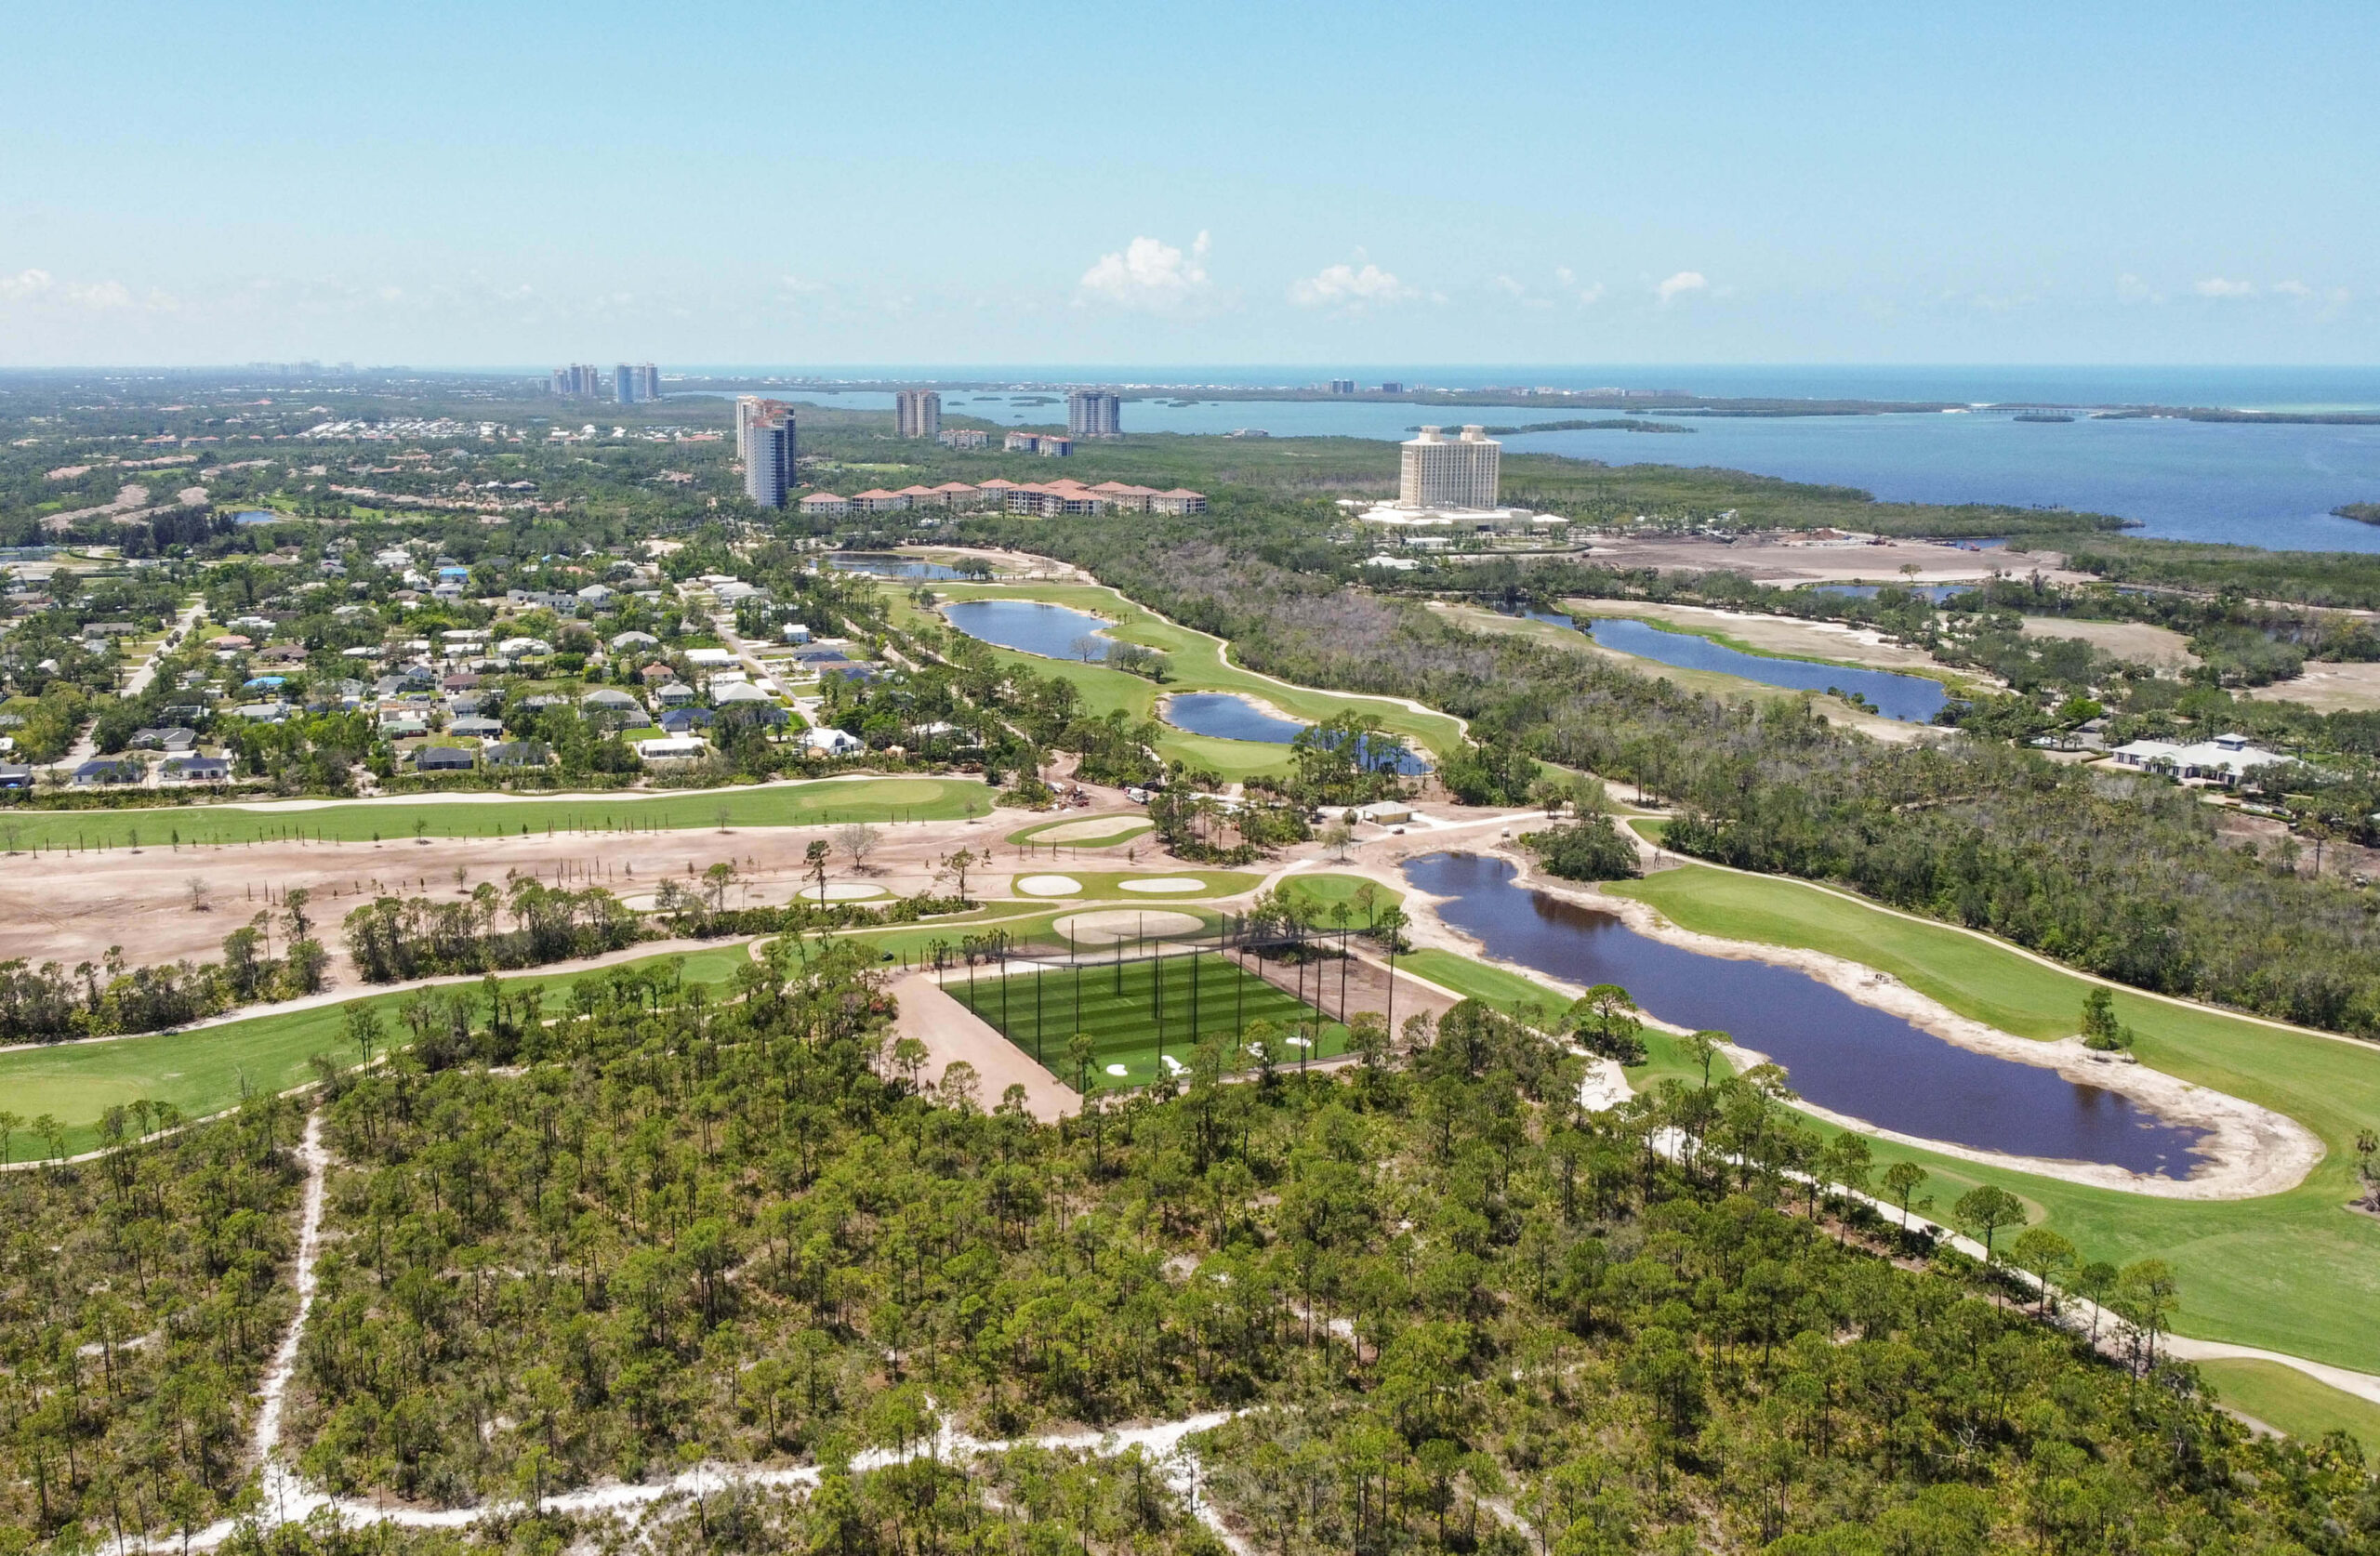 Aerial image of the netted driving range at Saltleaf Golf Preserve with nature and water in the background